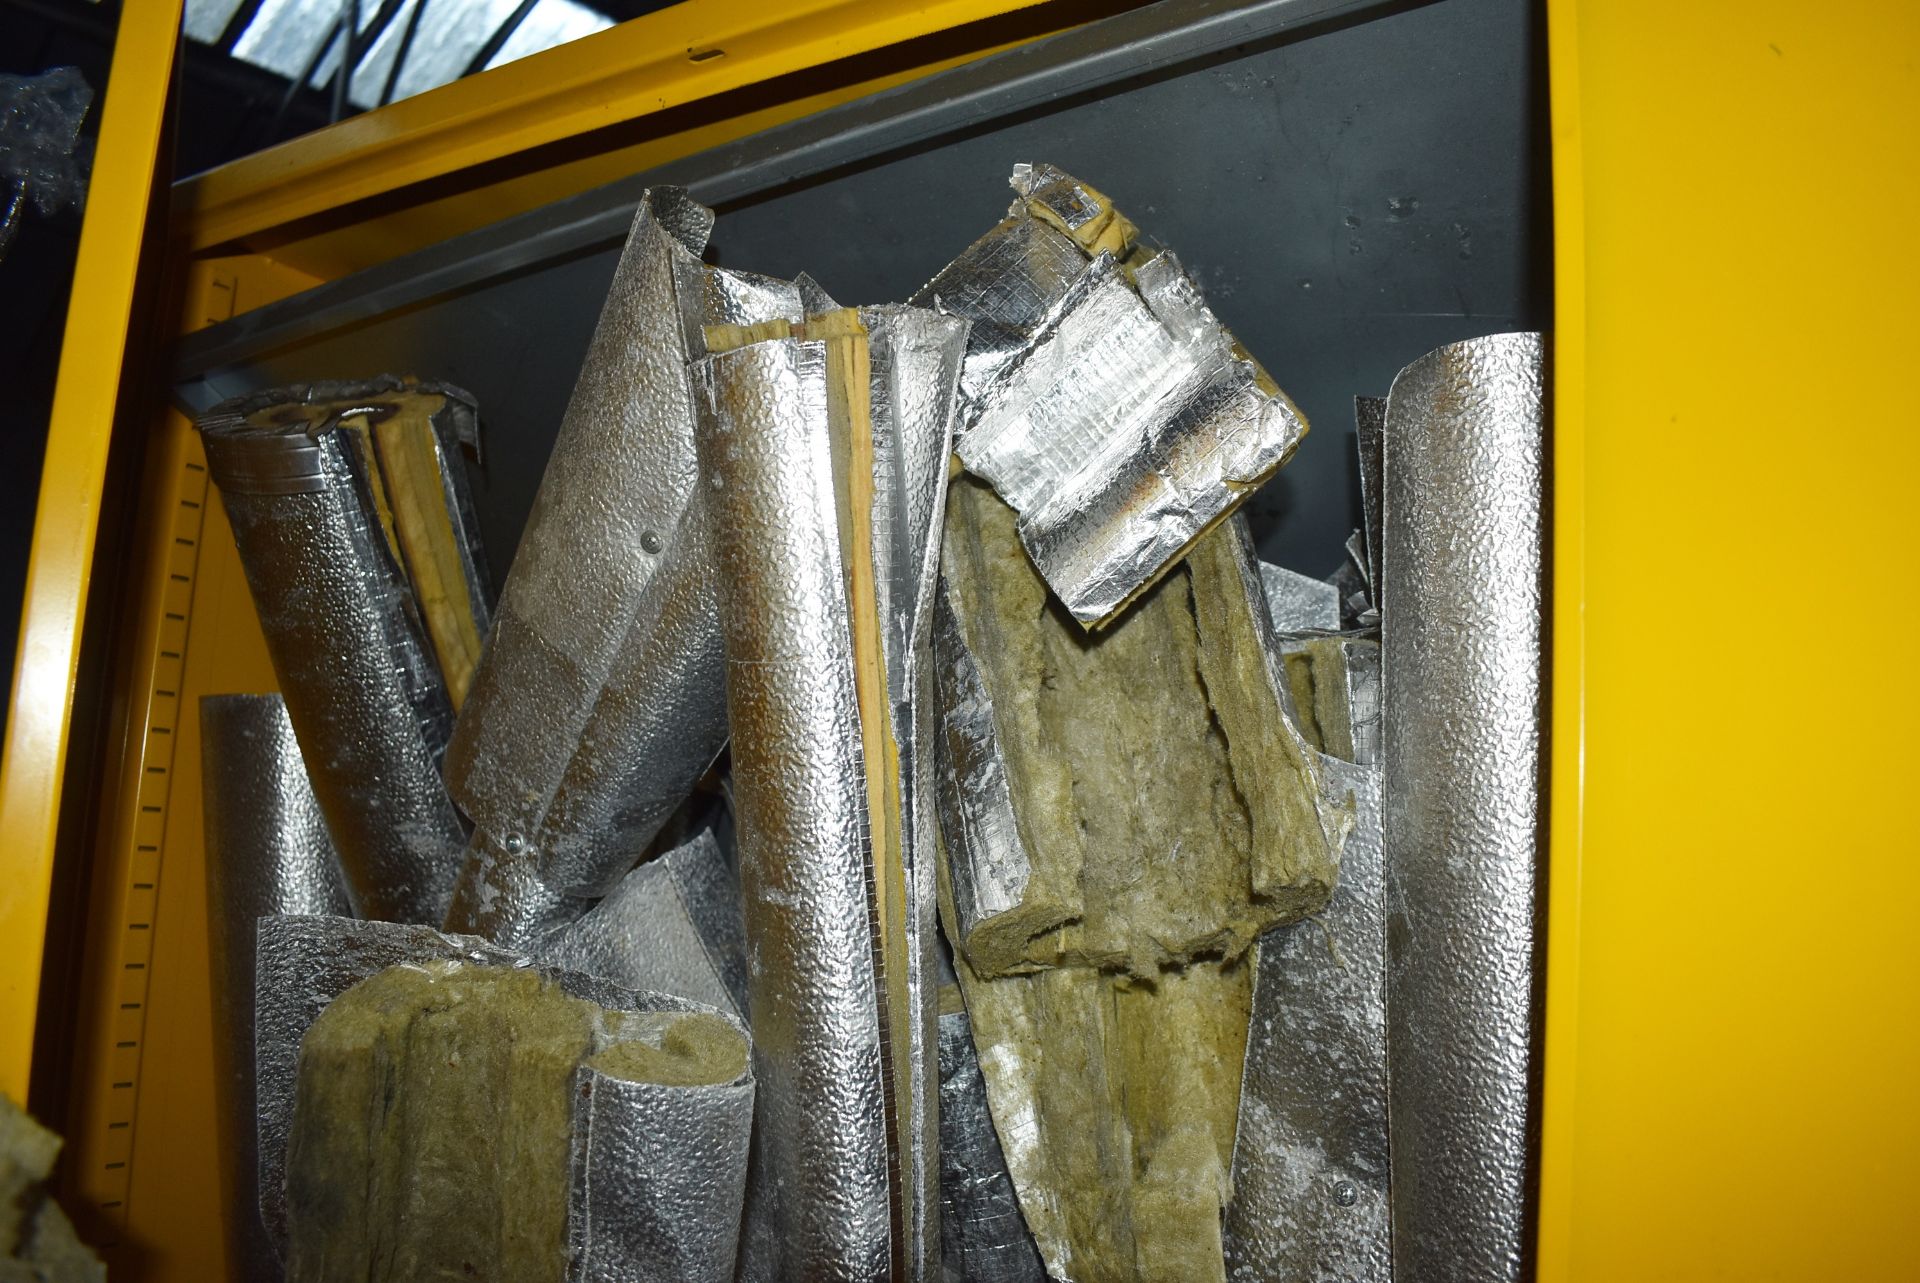 Large Quantity of Thermal Pipe Covering Contents of Two Upright Cabinets - Cabinets Not Included - - Image 8 of 10